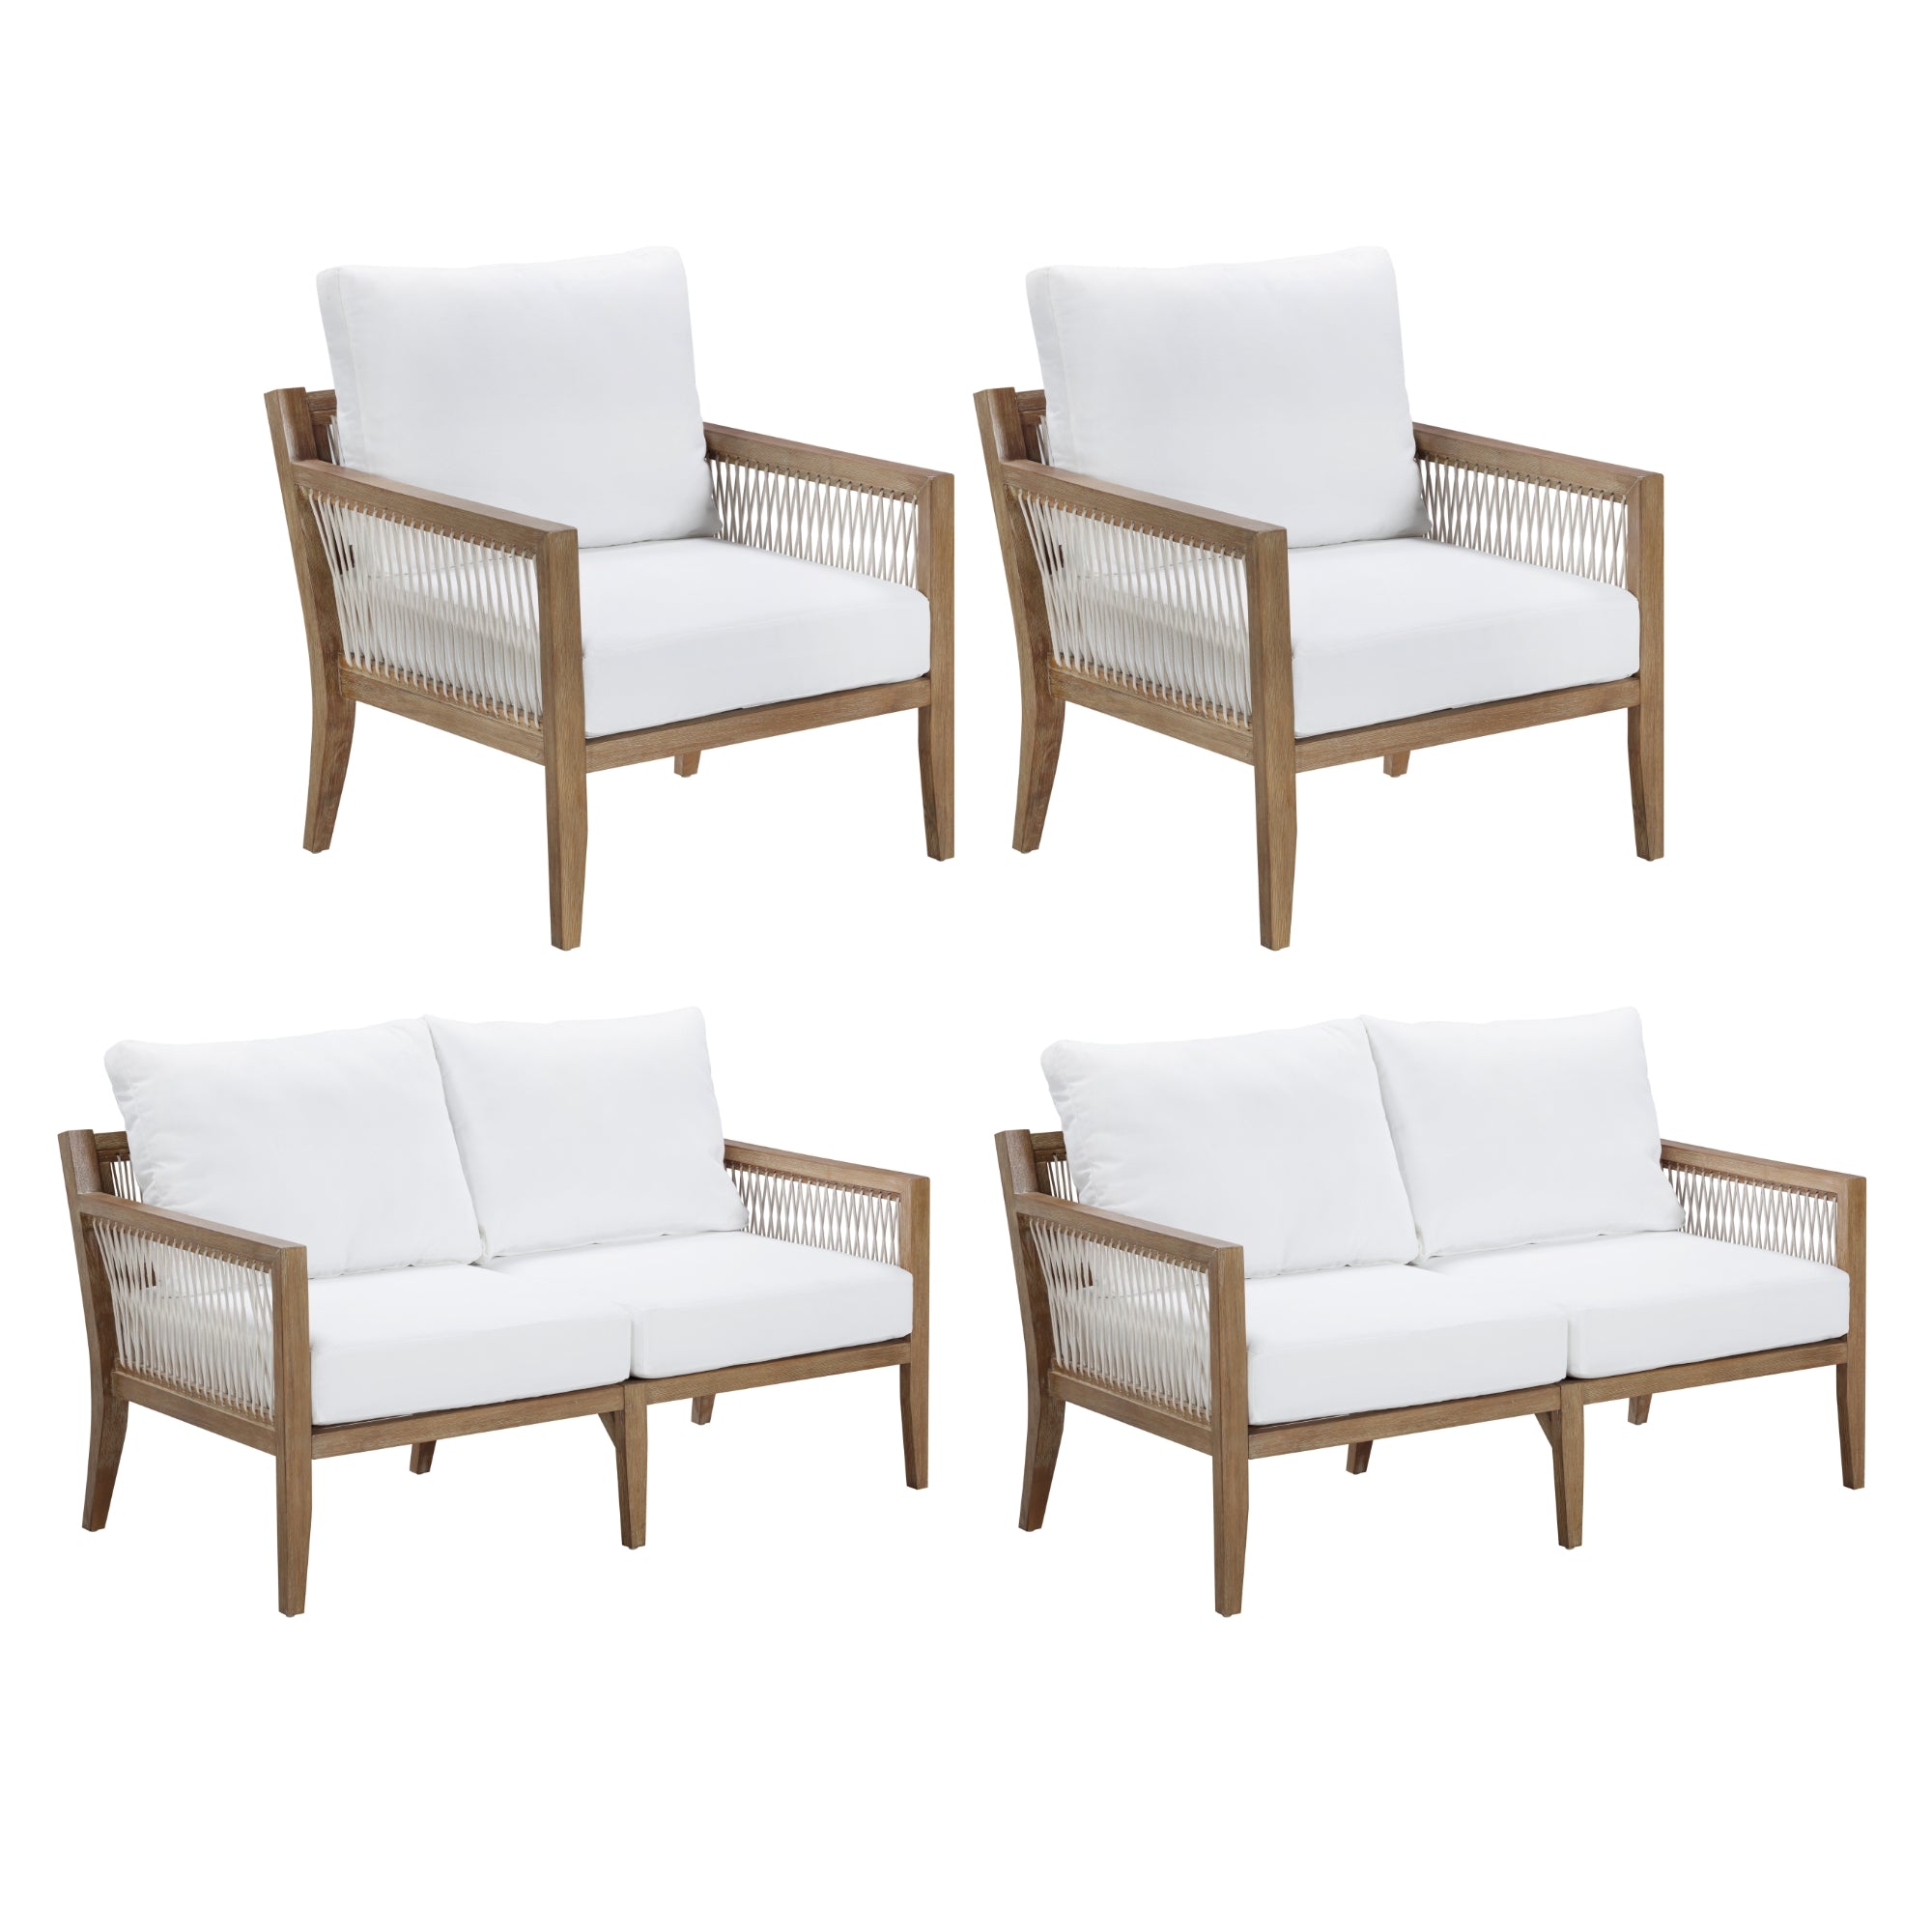 Set of 2 Outdoor Loveseats & 2 Chairs White